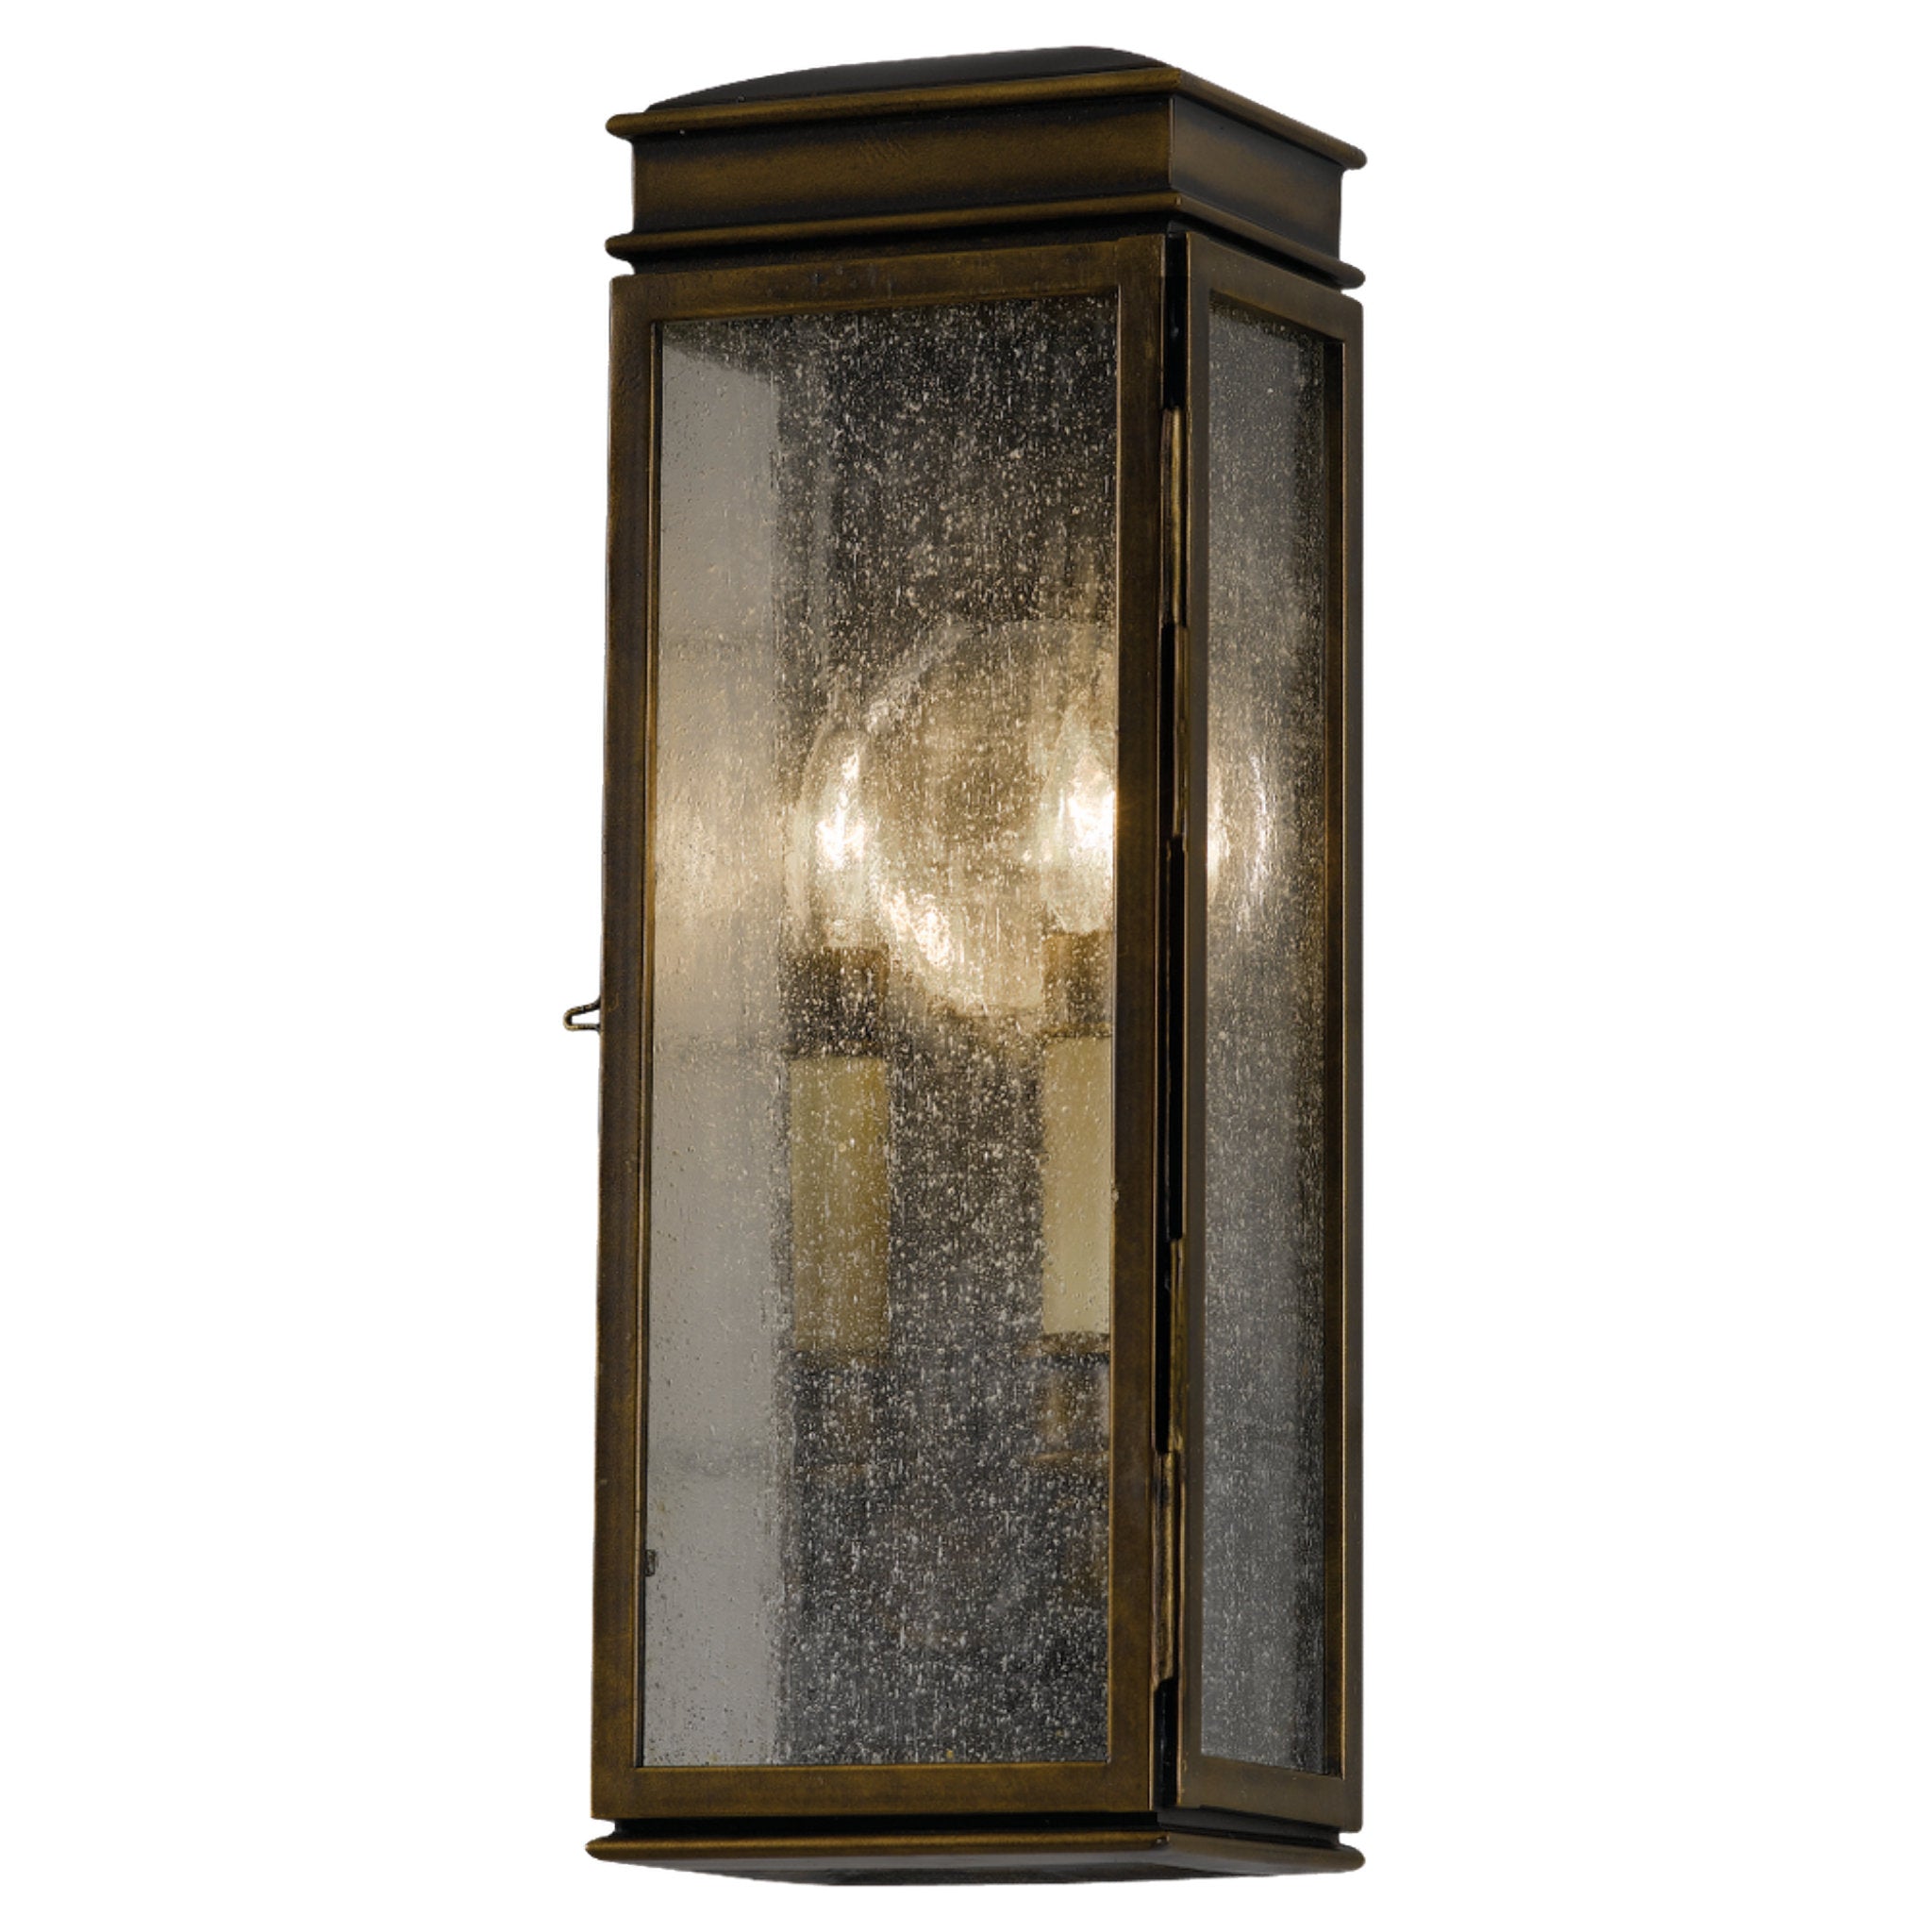 Whitaker Small Lantern Traditional Outdoor Fixture 6" Width 17.25" Height Powder Coated Steel Clear Seeded Shade in Astral Bronze